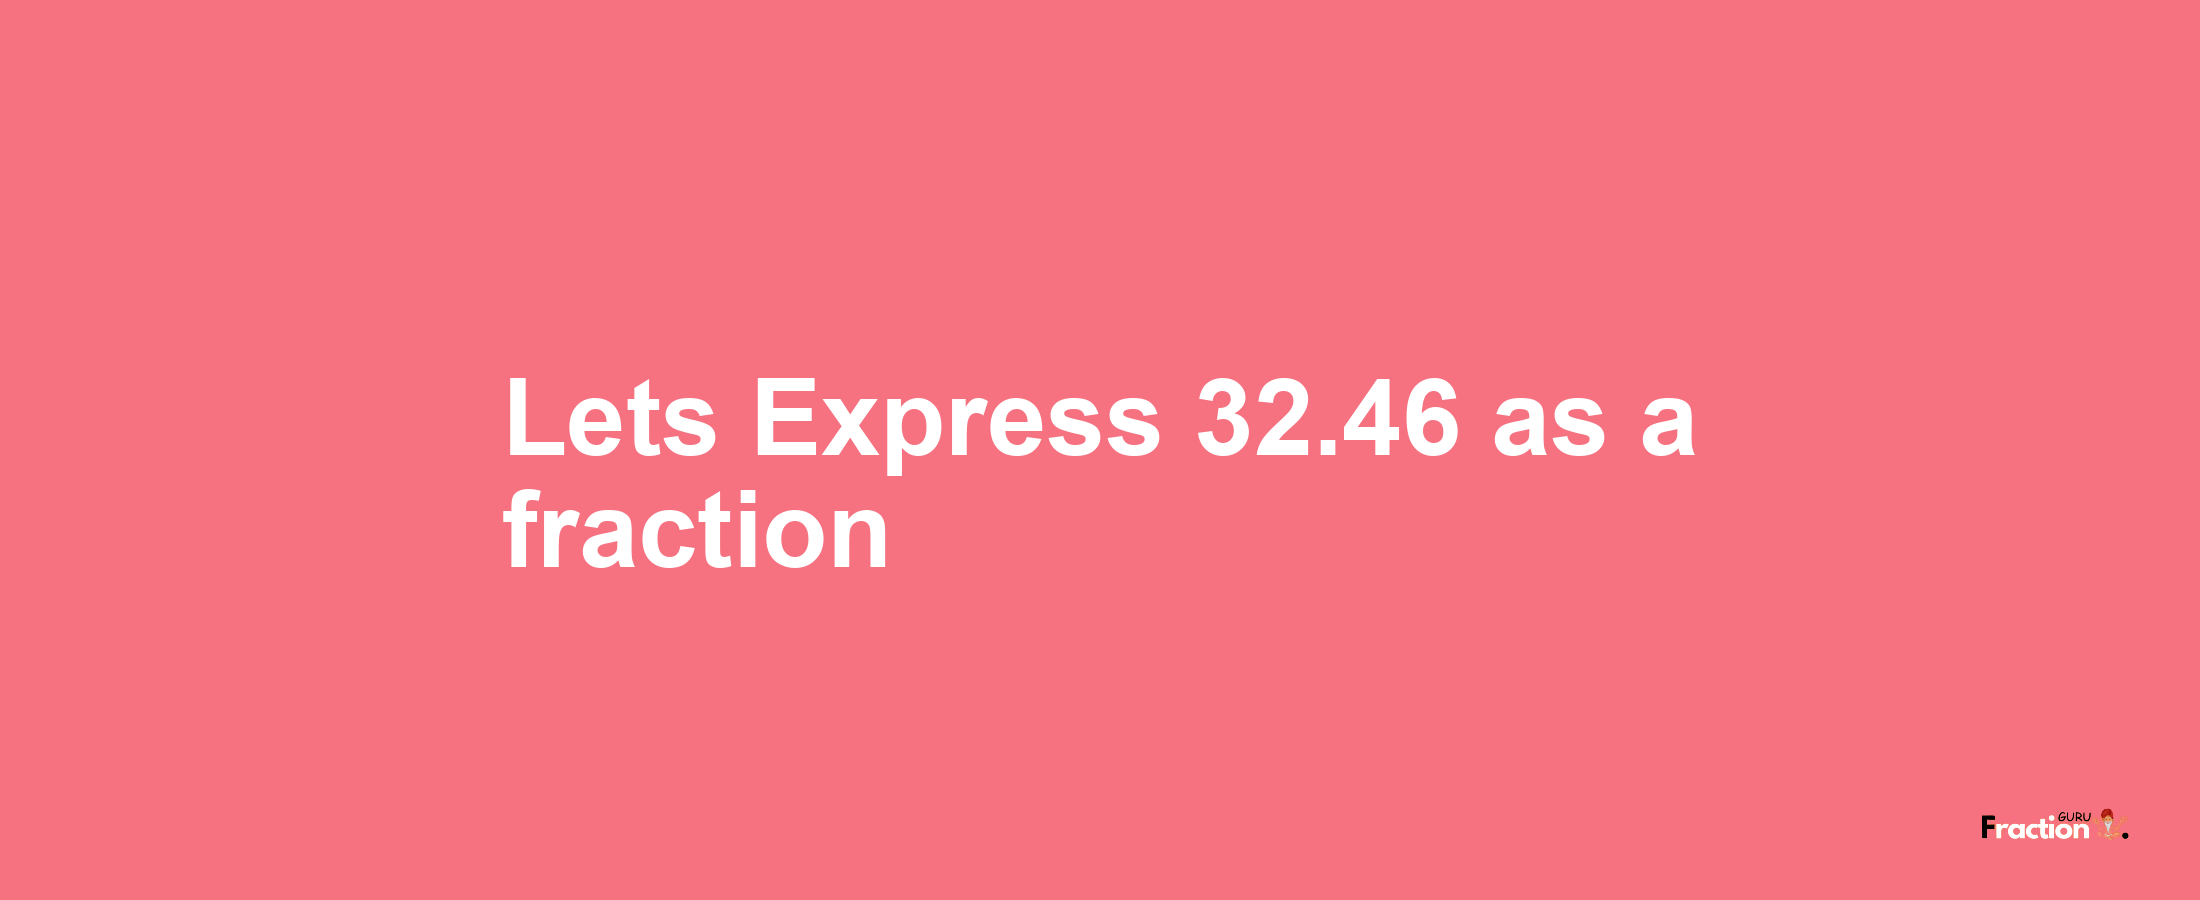 Lets Express 32.46 as afraction